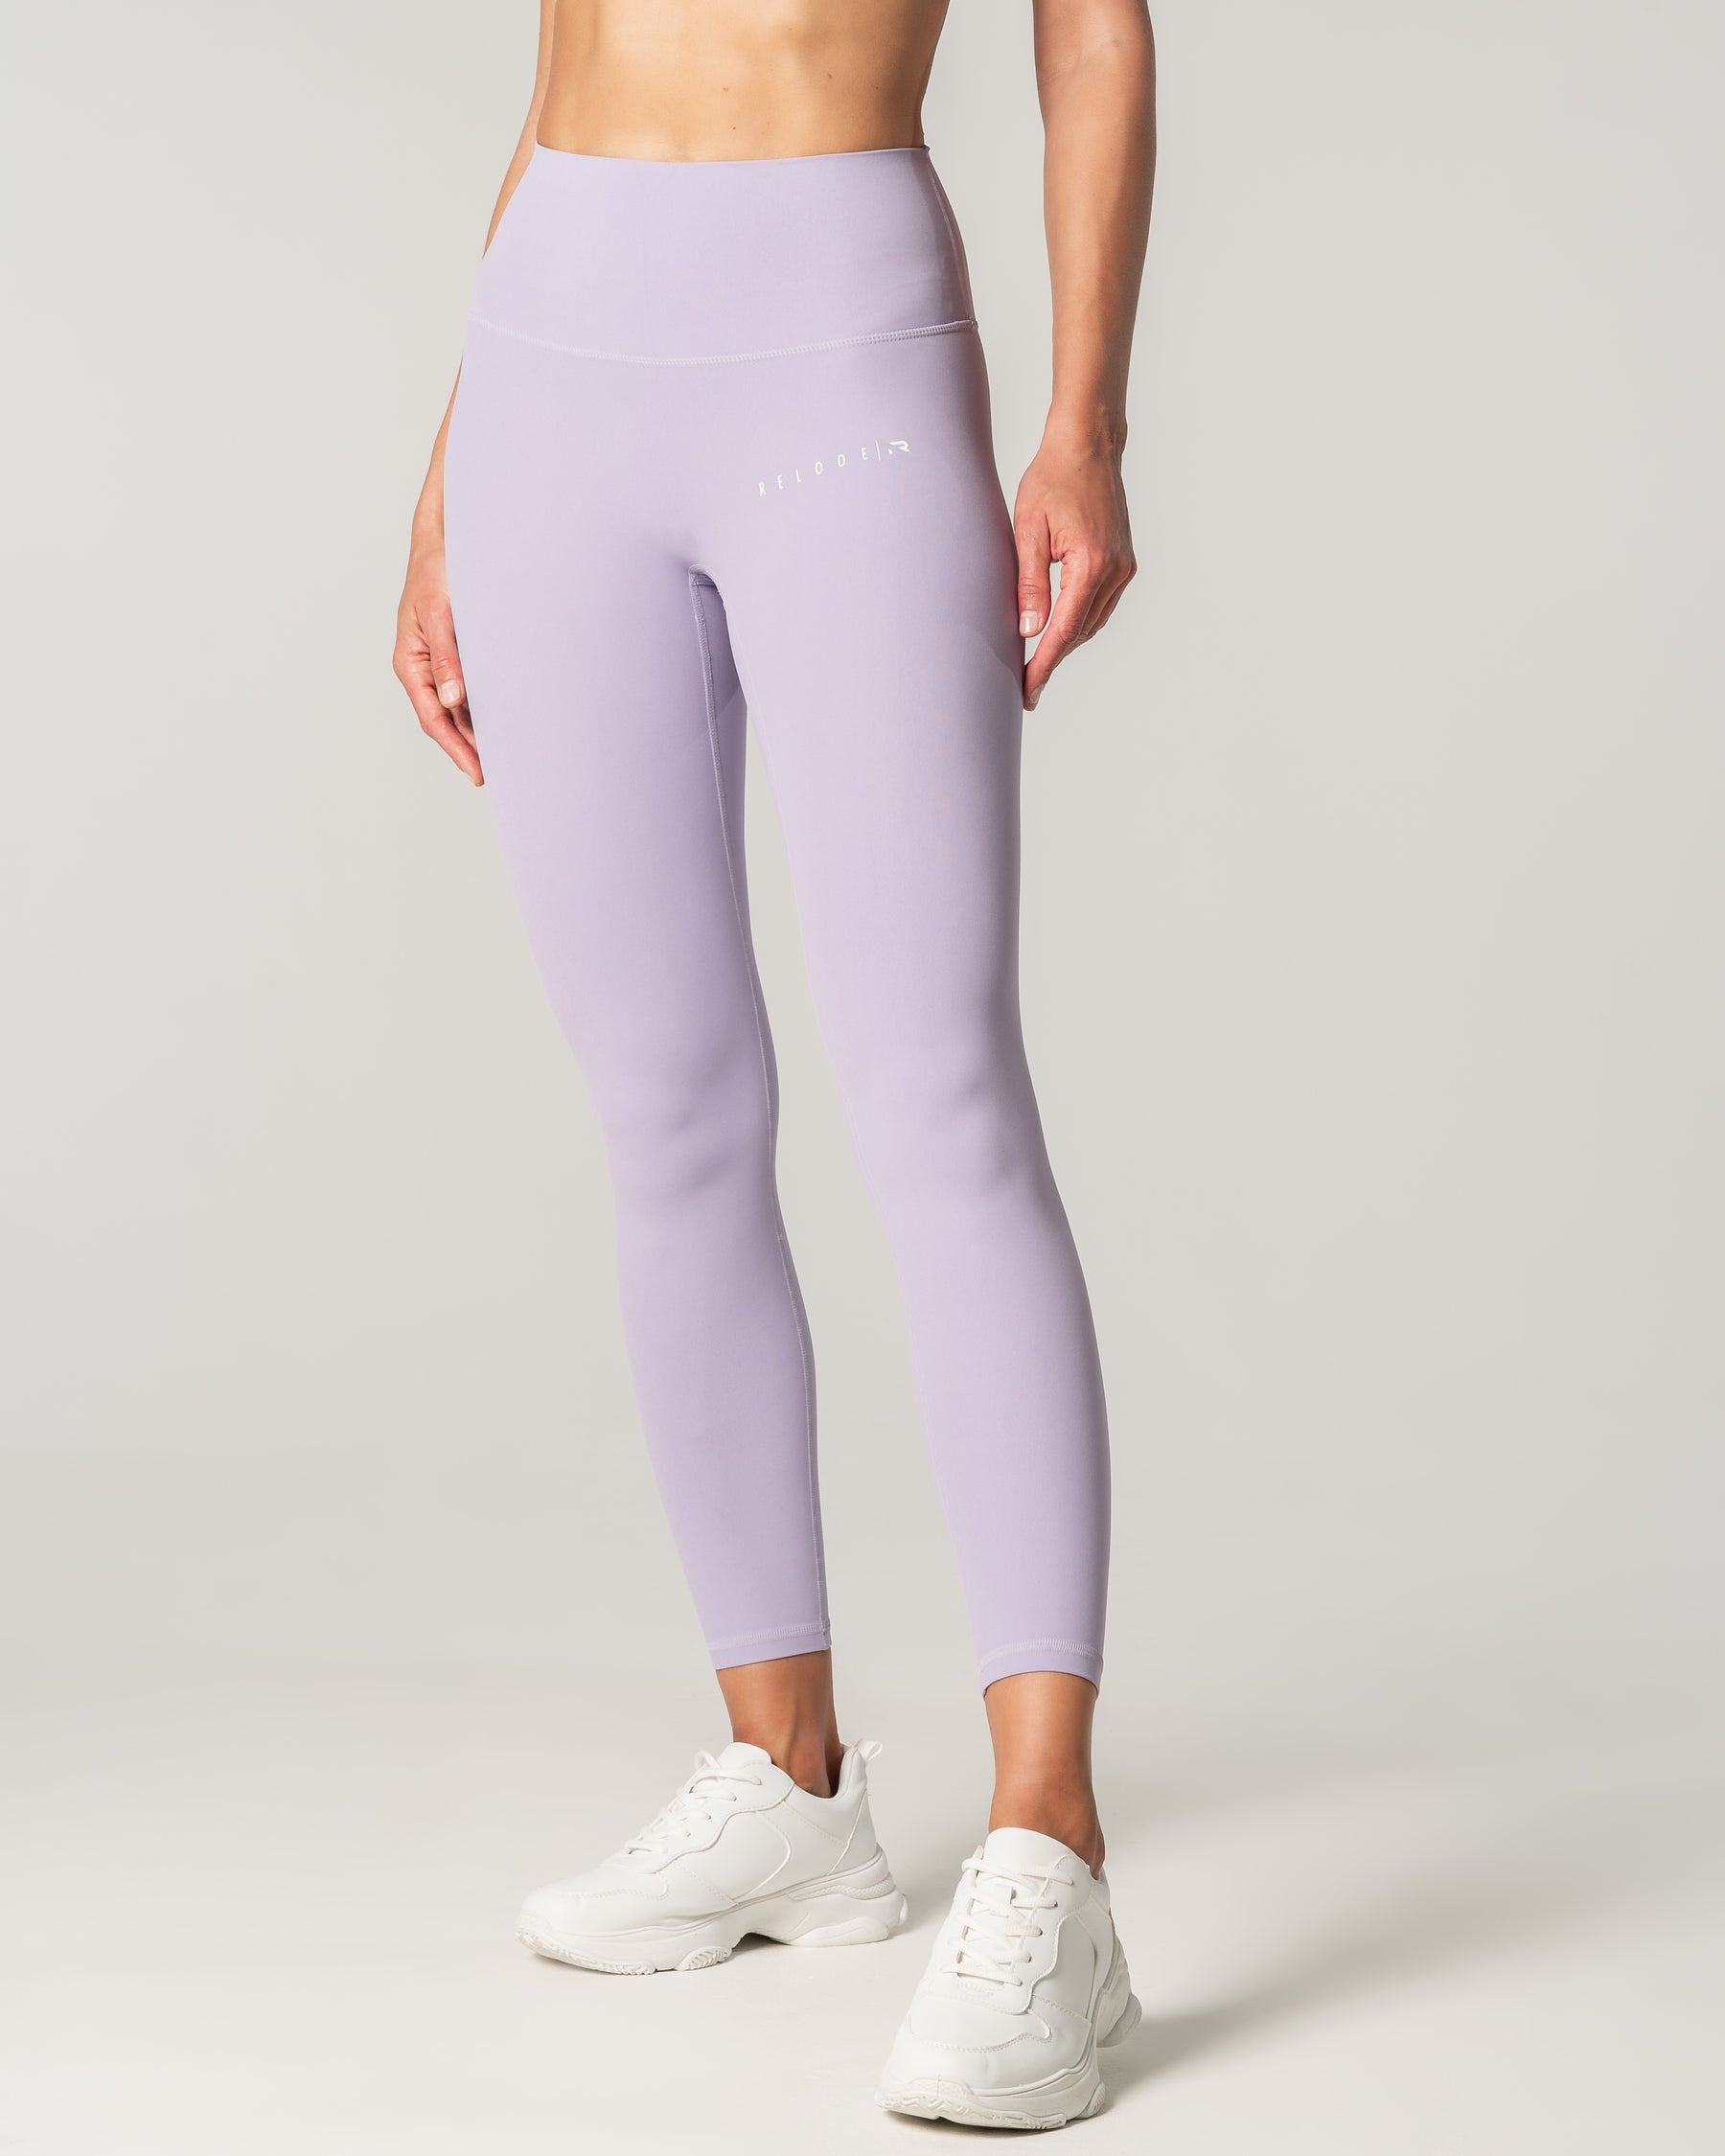 Mercy Tights - Lilac